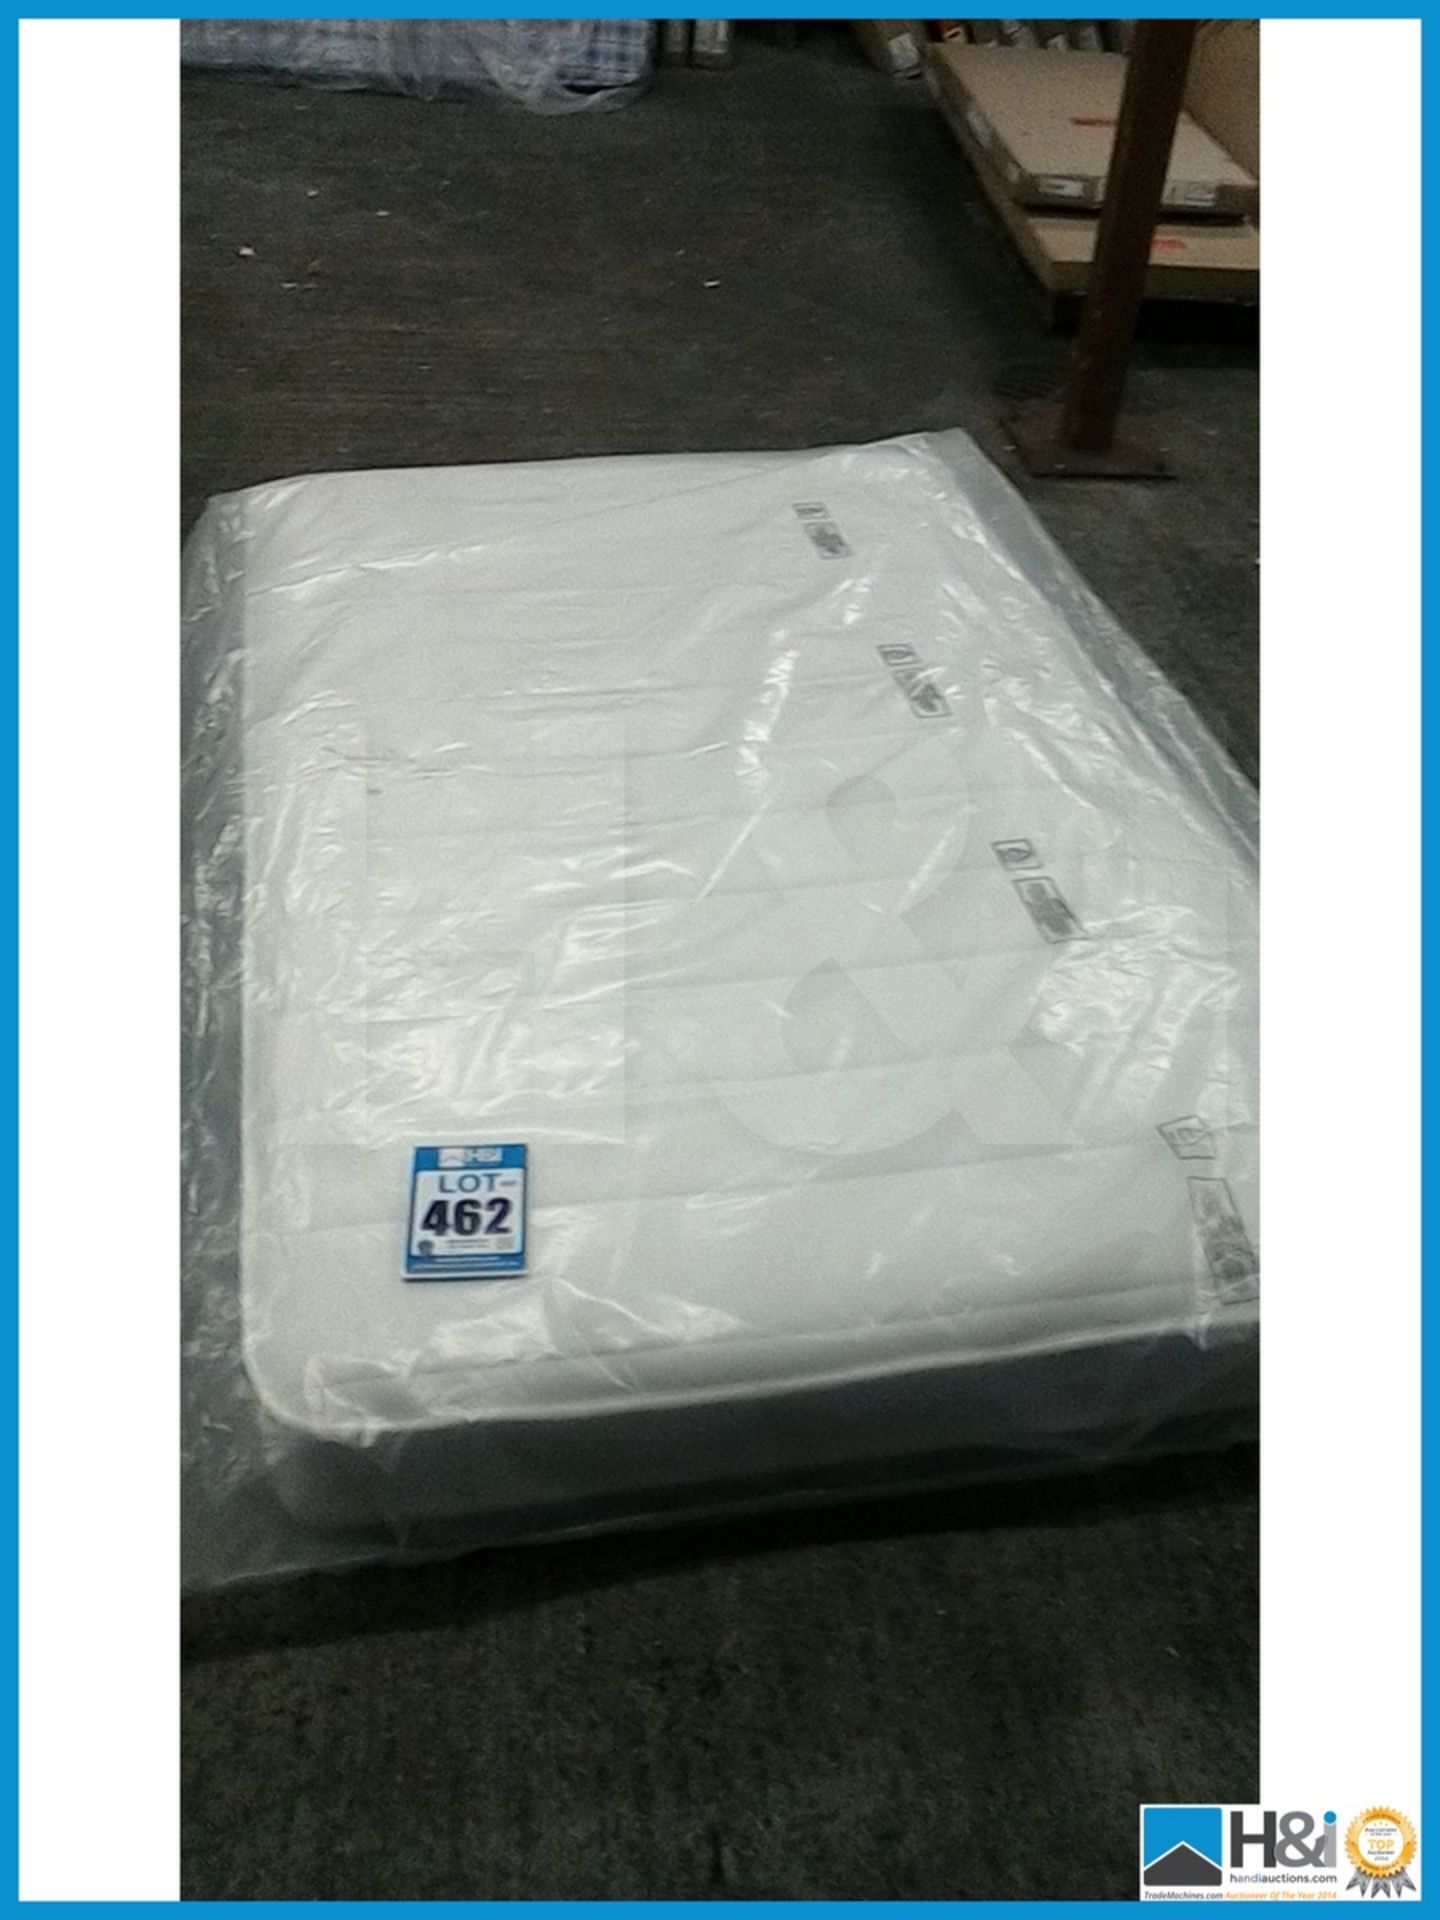 NEW IN BOX AIRSRUNG MEMORY FOAM MATTRESS SMALL DOUBLE RRP £239 Appraisal: Viewing Essential Serial